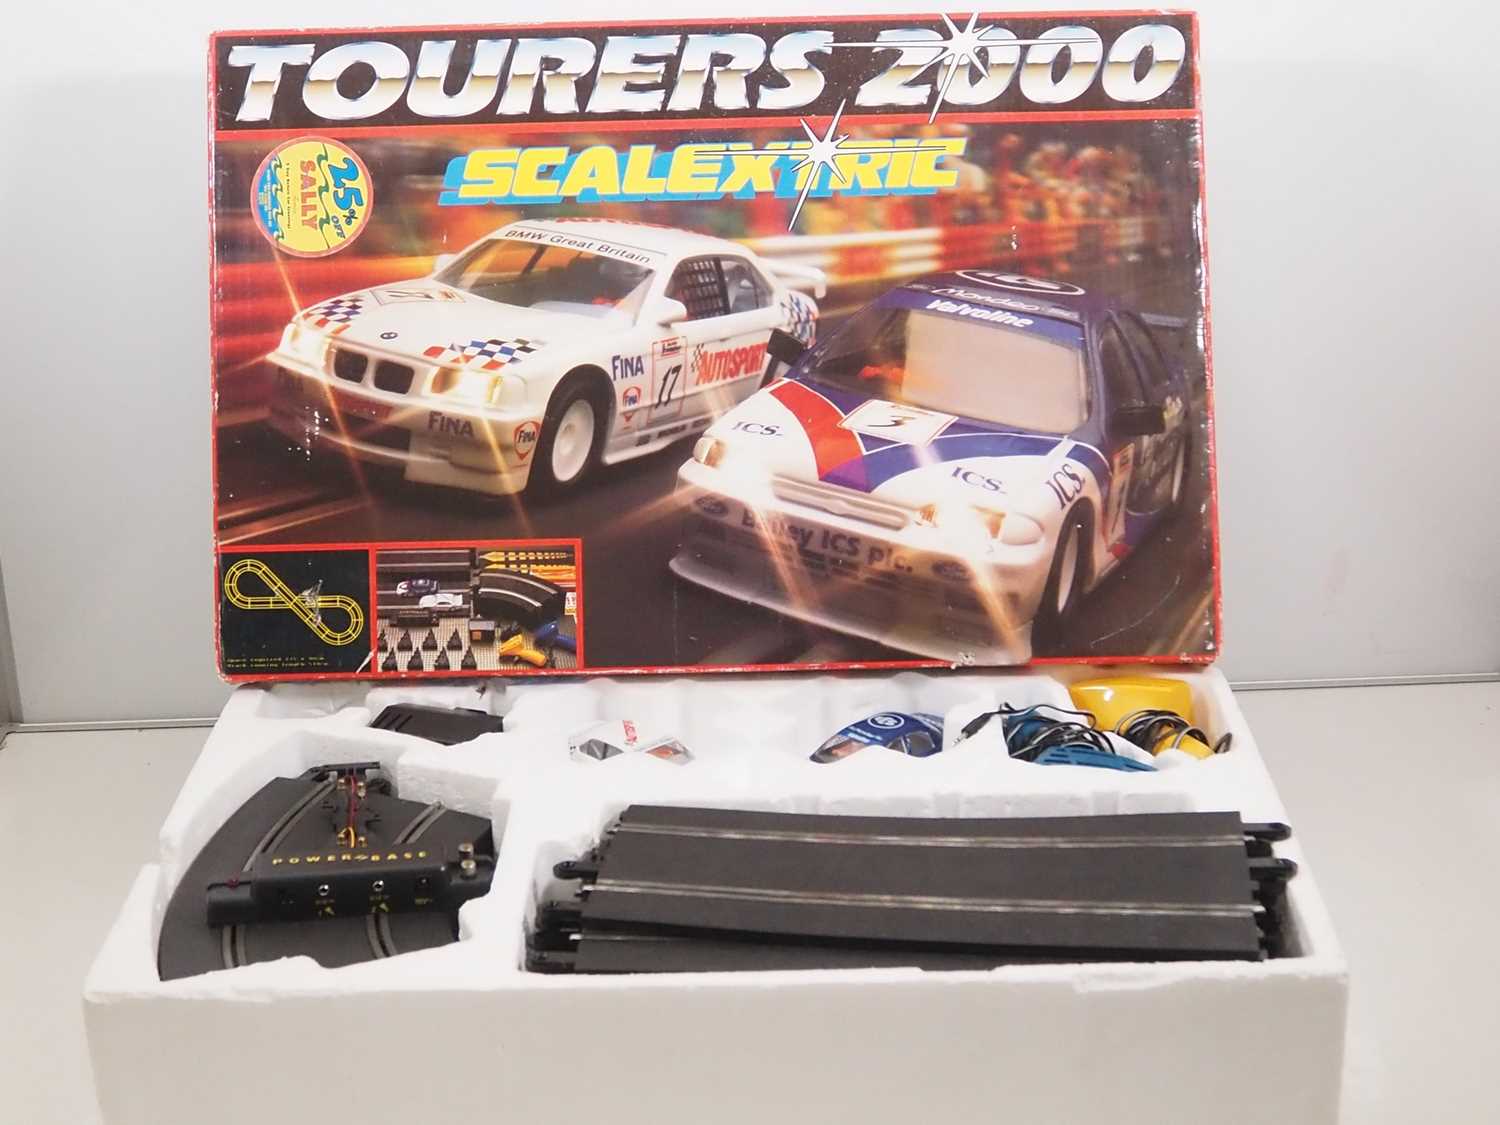 A SCALEXTRIC 'Tourers 2000' slot racing set, appears complete - VG in G box